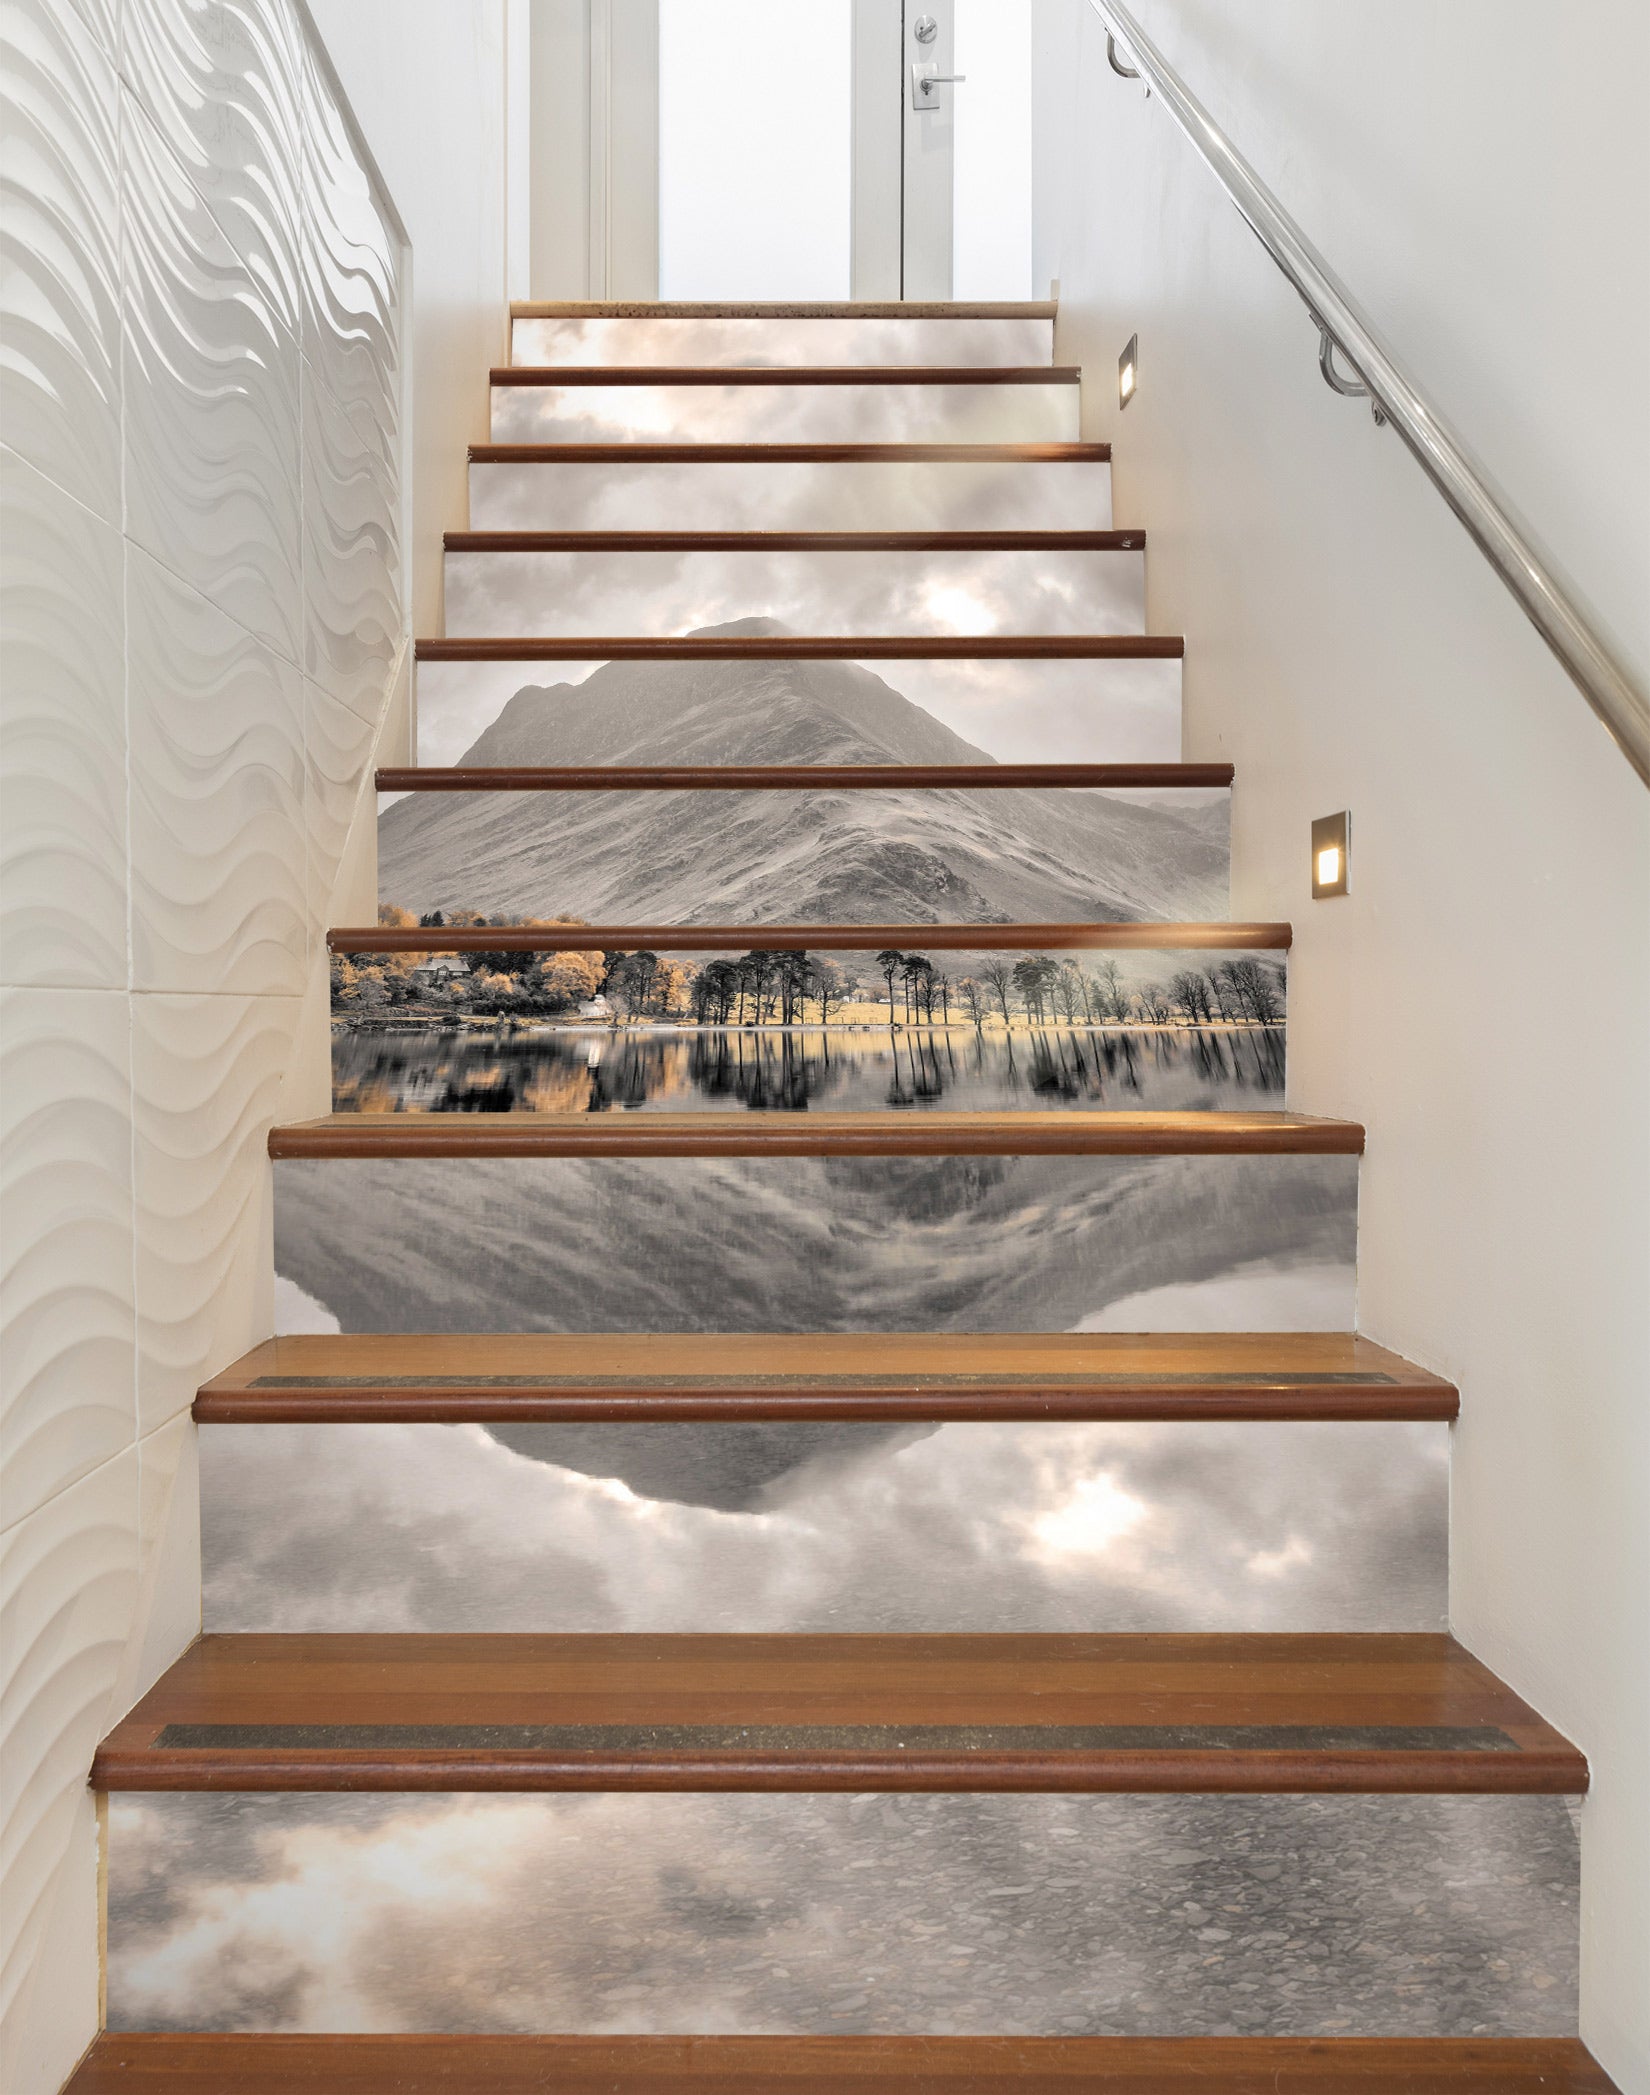 3D Lake Mountains Shadow 99159 Assaf Frank Stair Risers